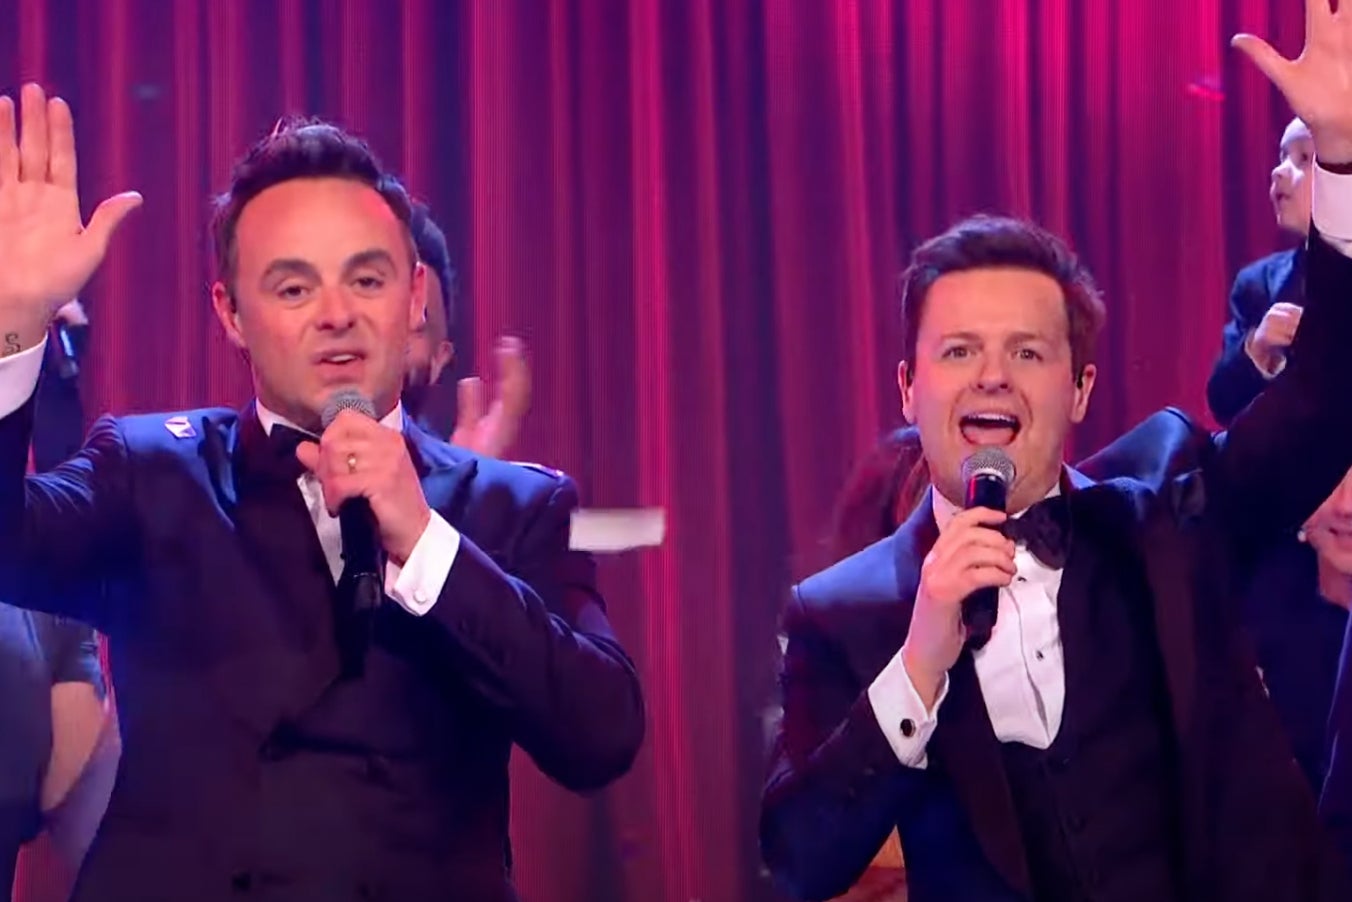 Presenting duo Ant and Dec waving goodbye to audience